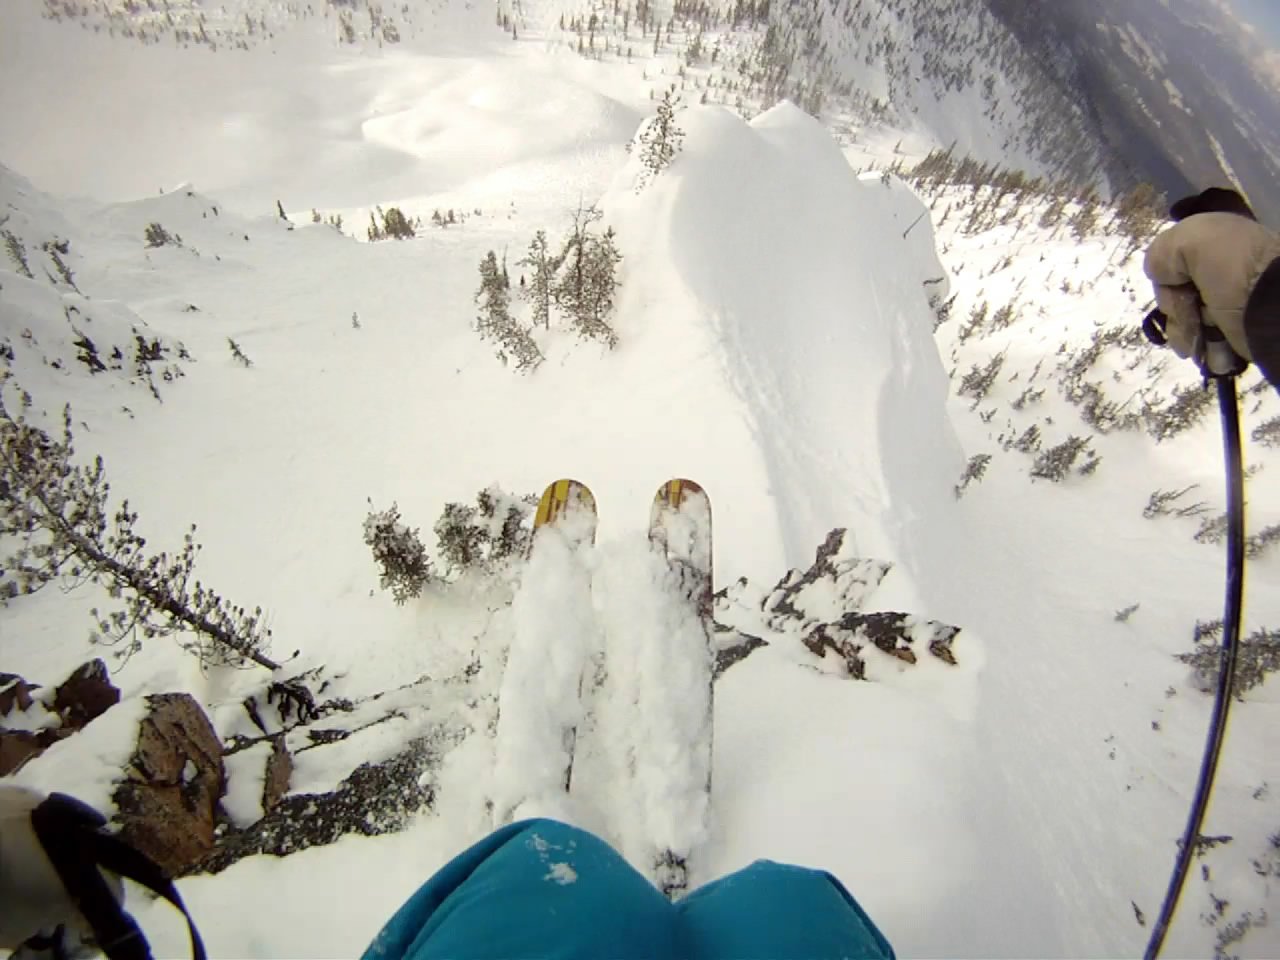 Kicking horse dropping in